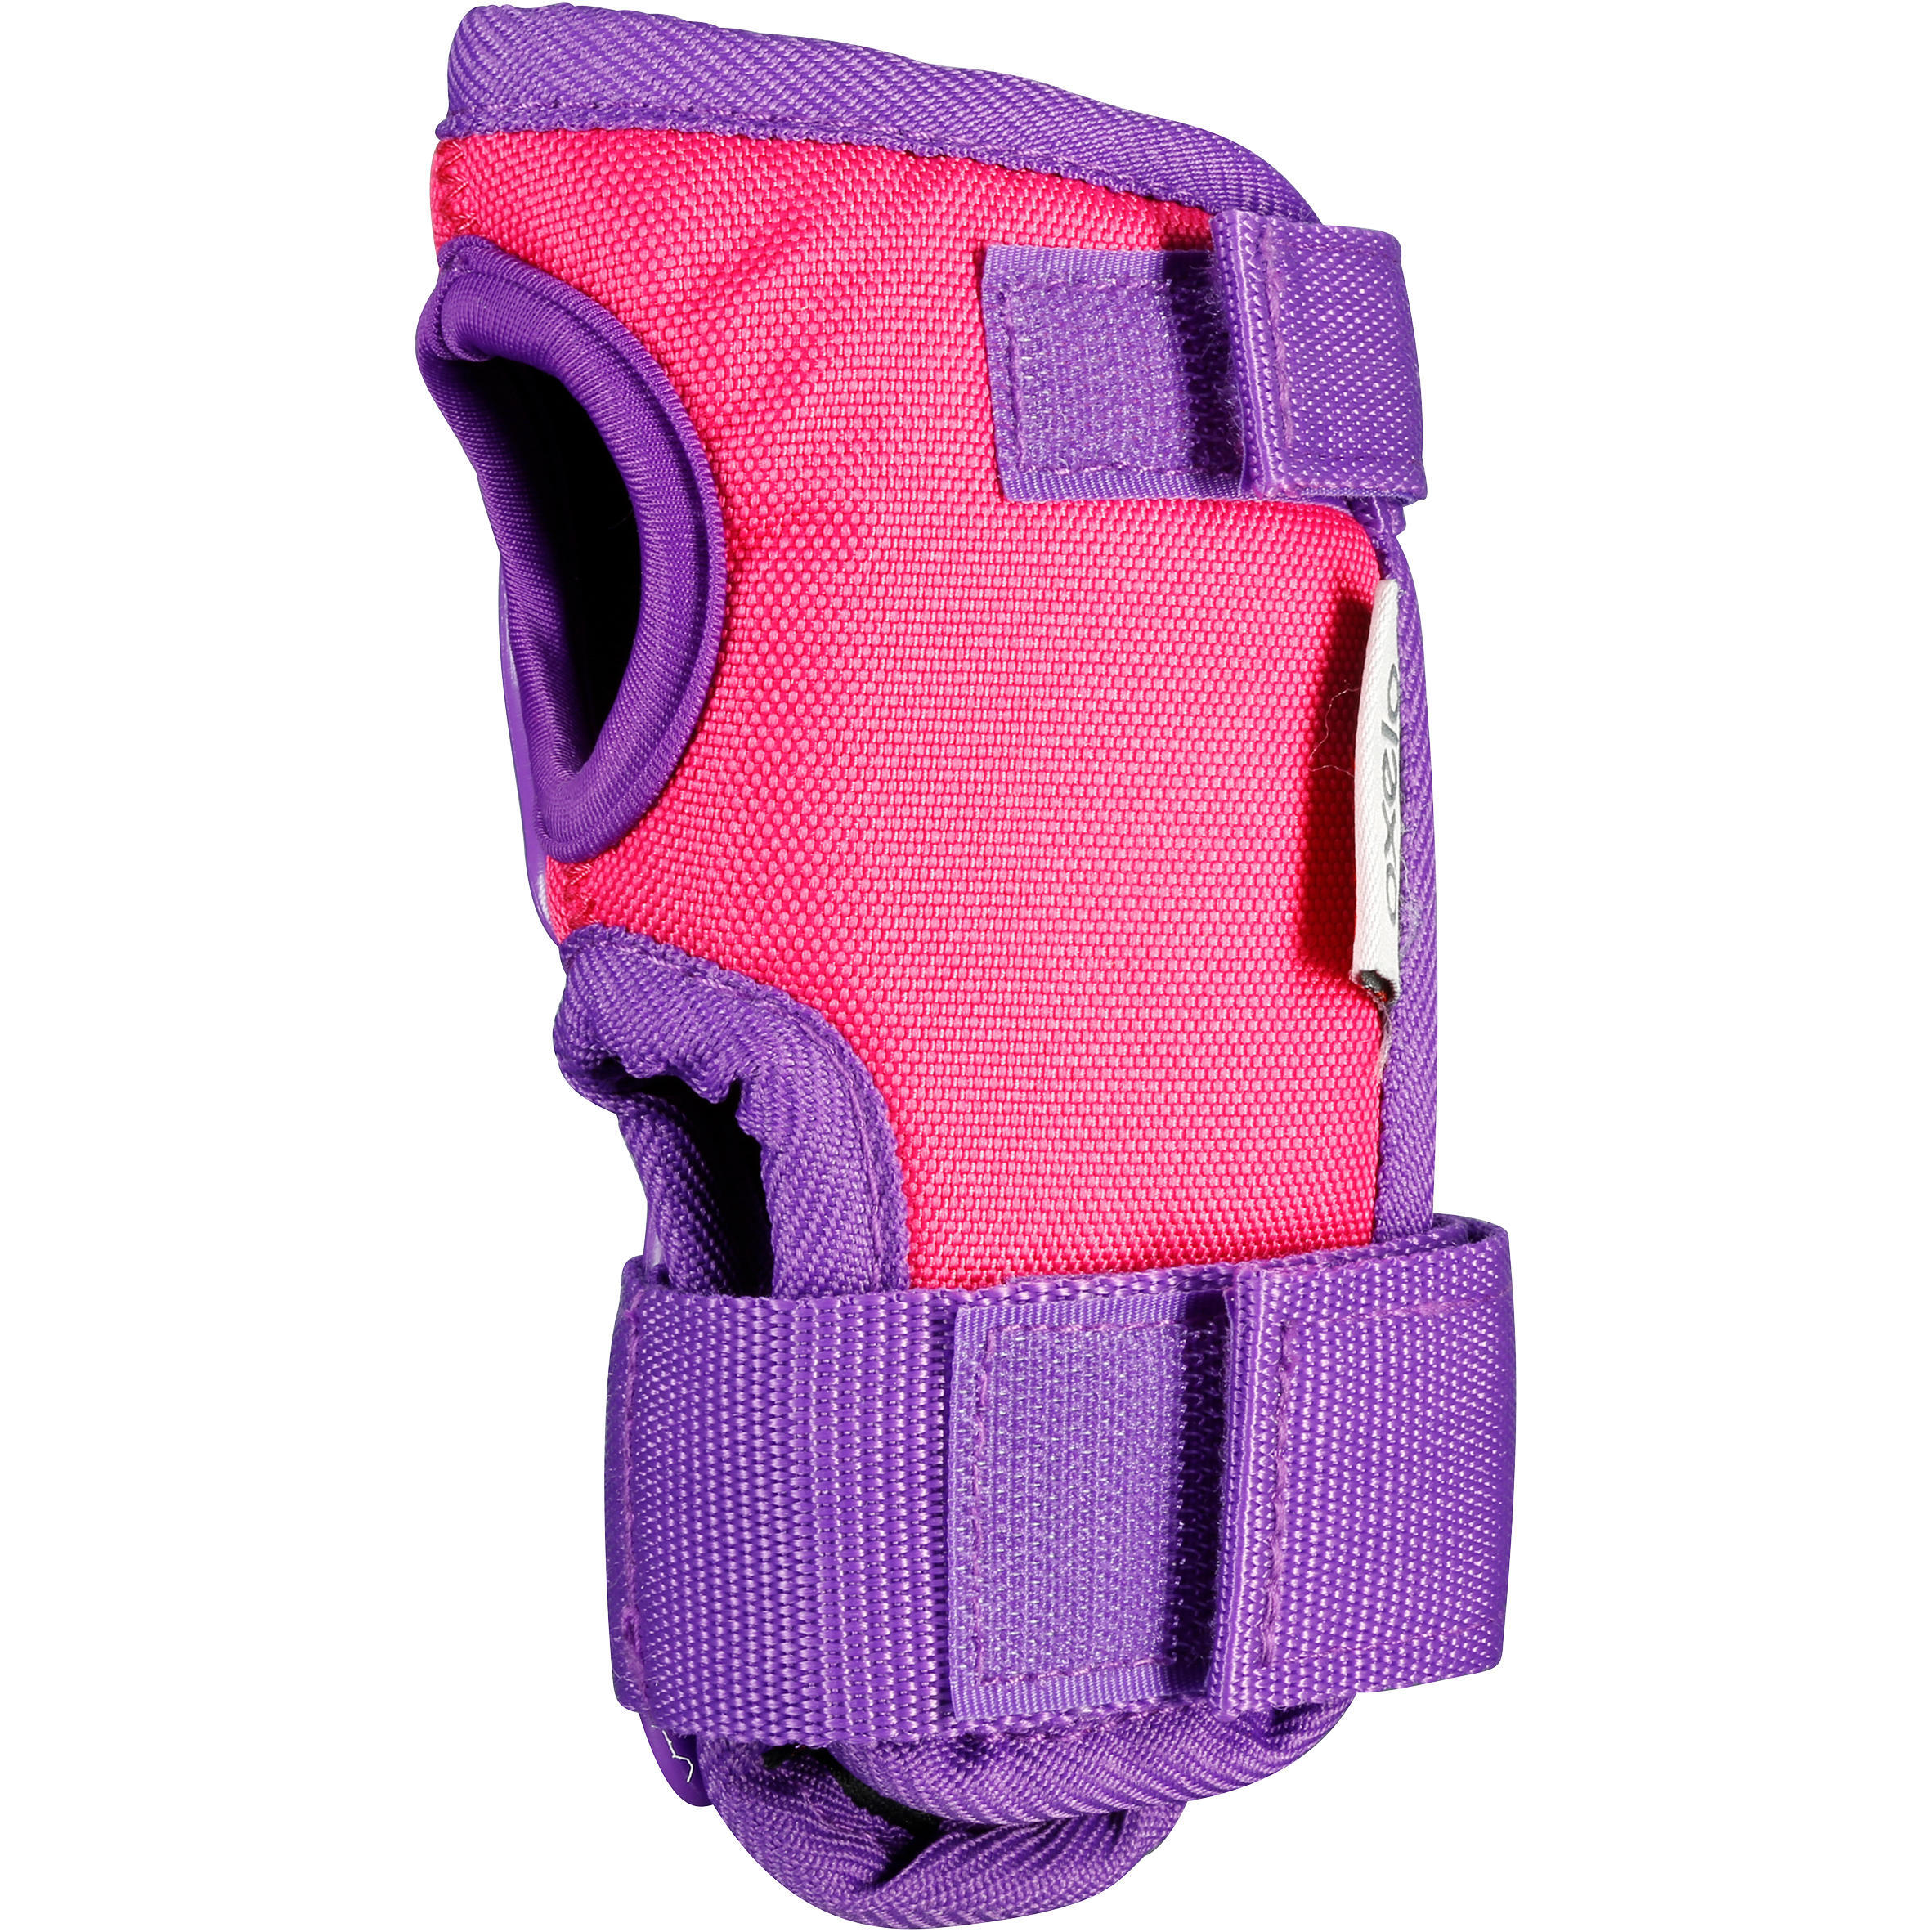 Kids' 2 x 3-Piece Inline Skating Scooter Skateboard Protective Gear Play - Pink 5/13